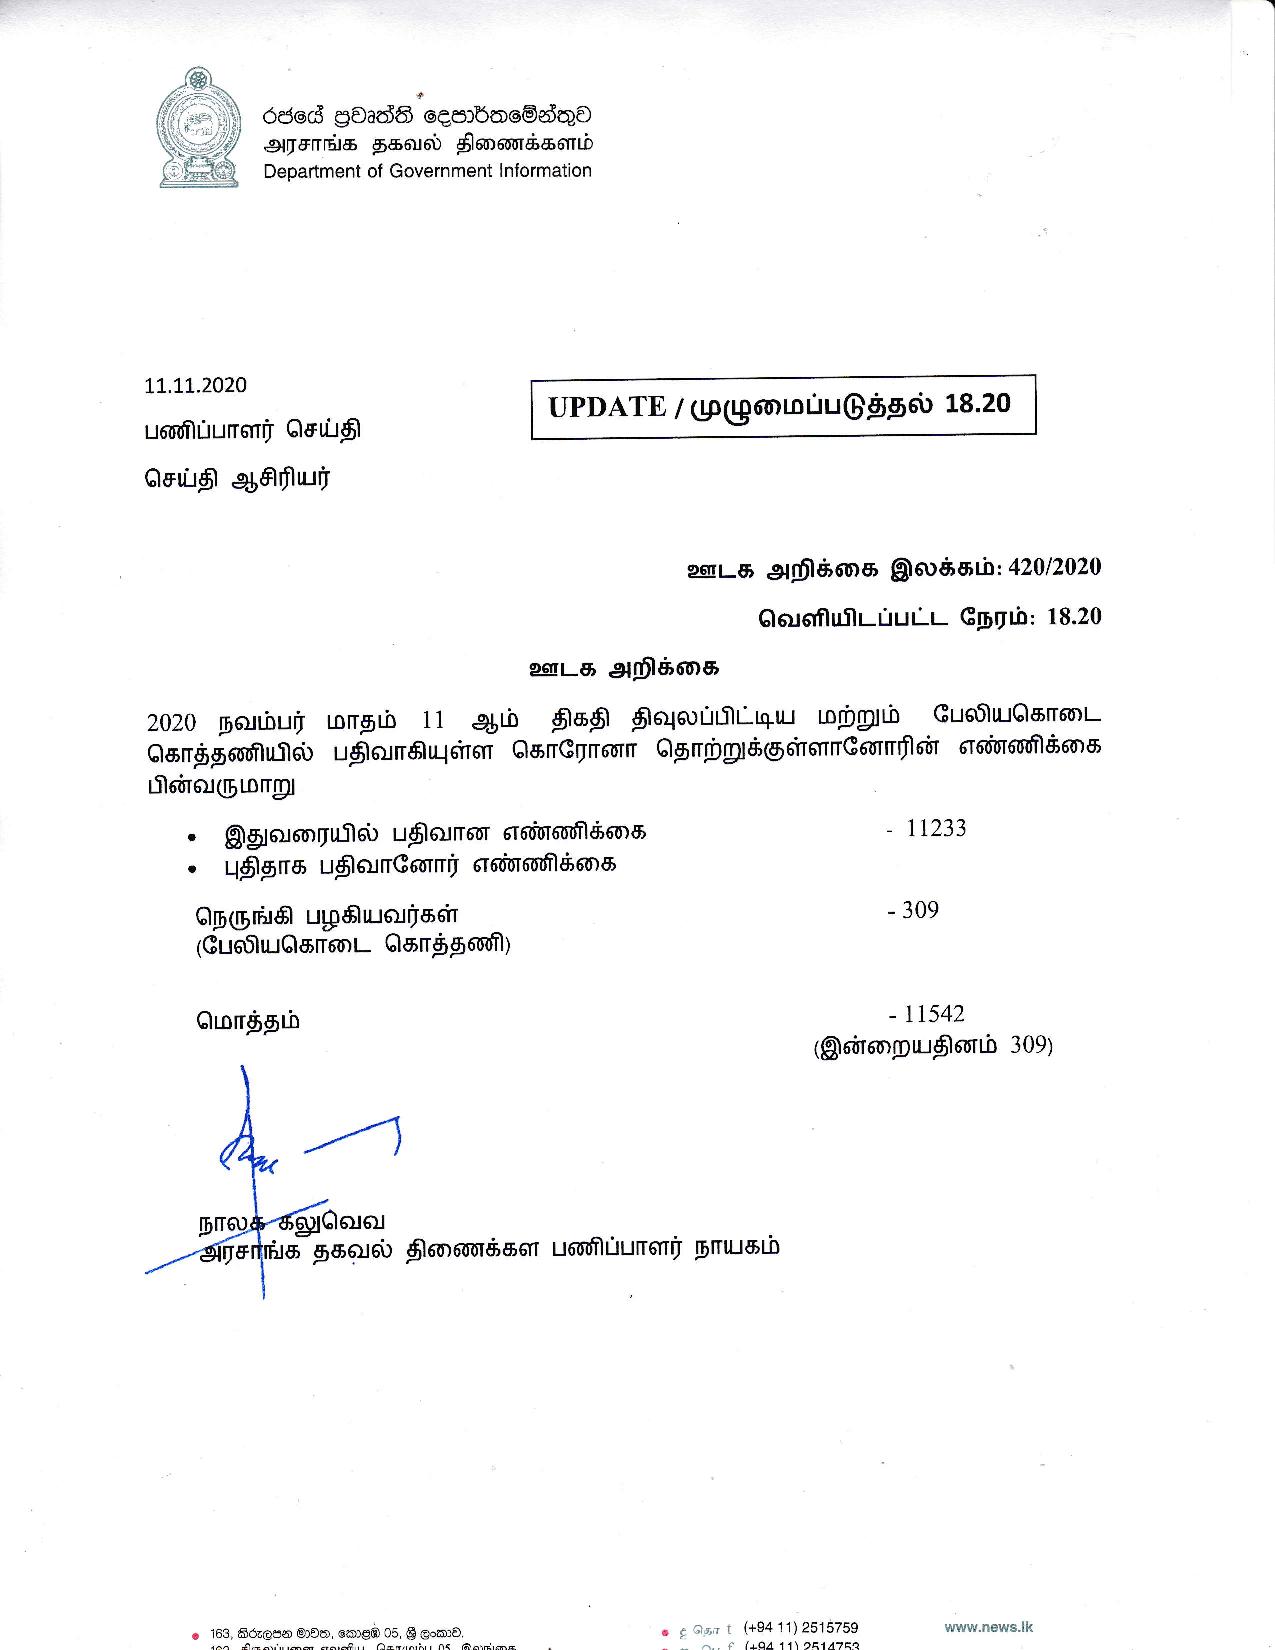 Release No 420 Tamil page 001